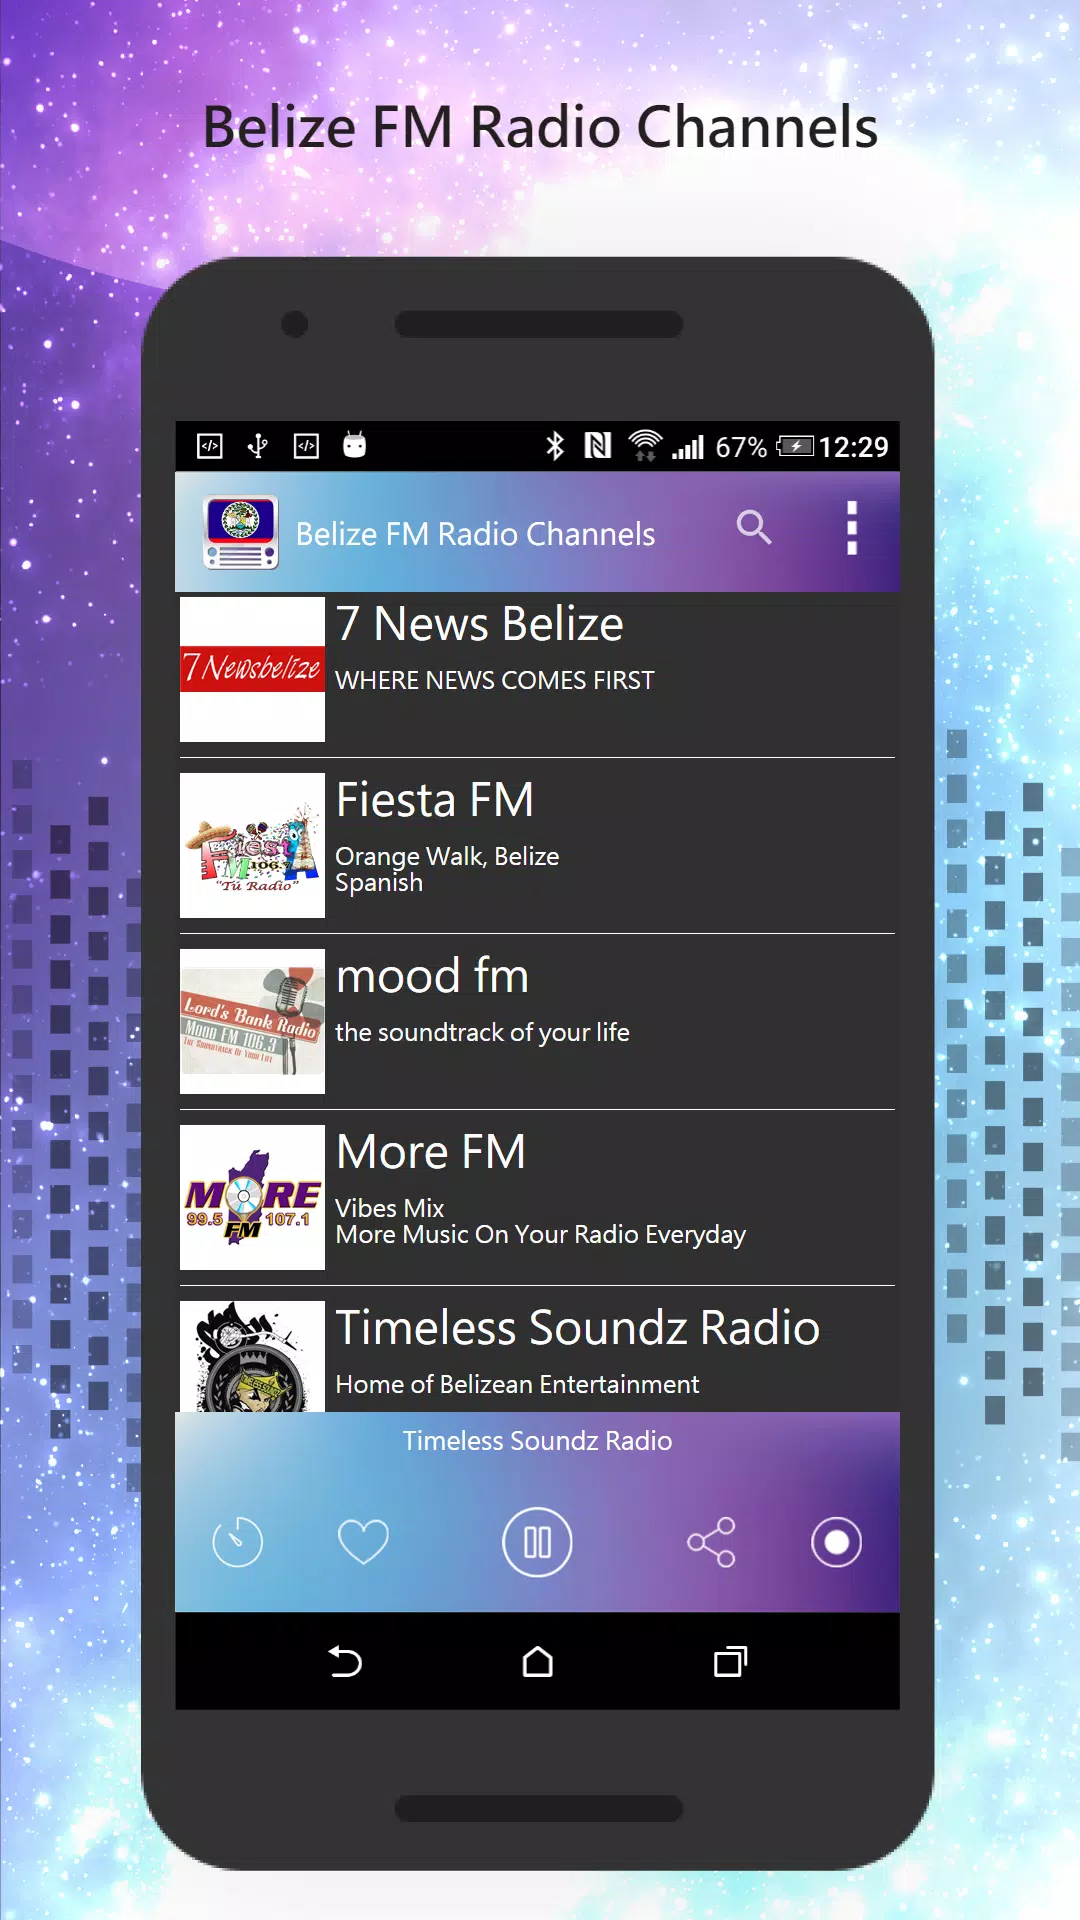 Mood FM Belize 106.3 - The Soundtrack of Your Life